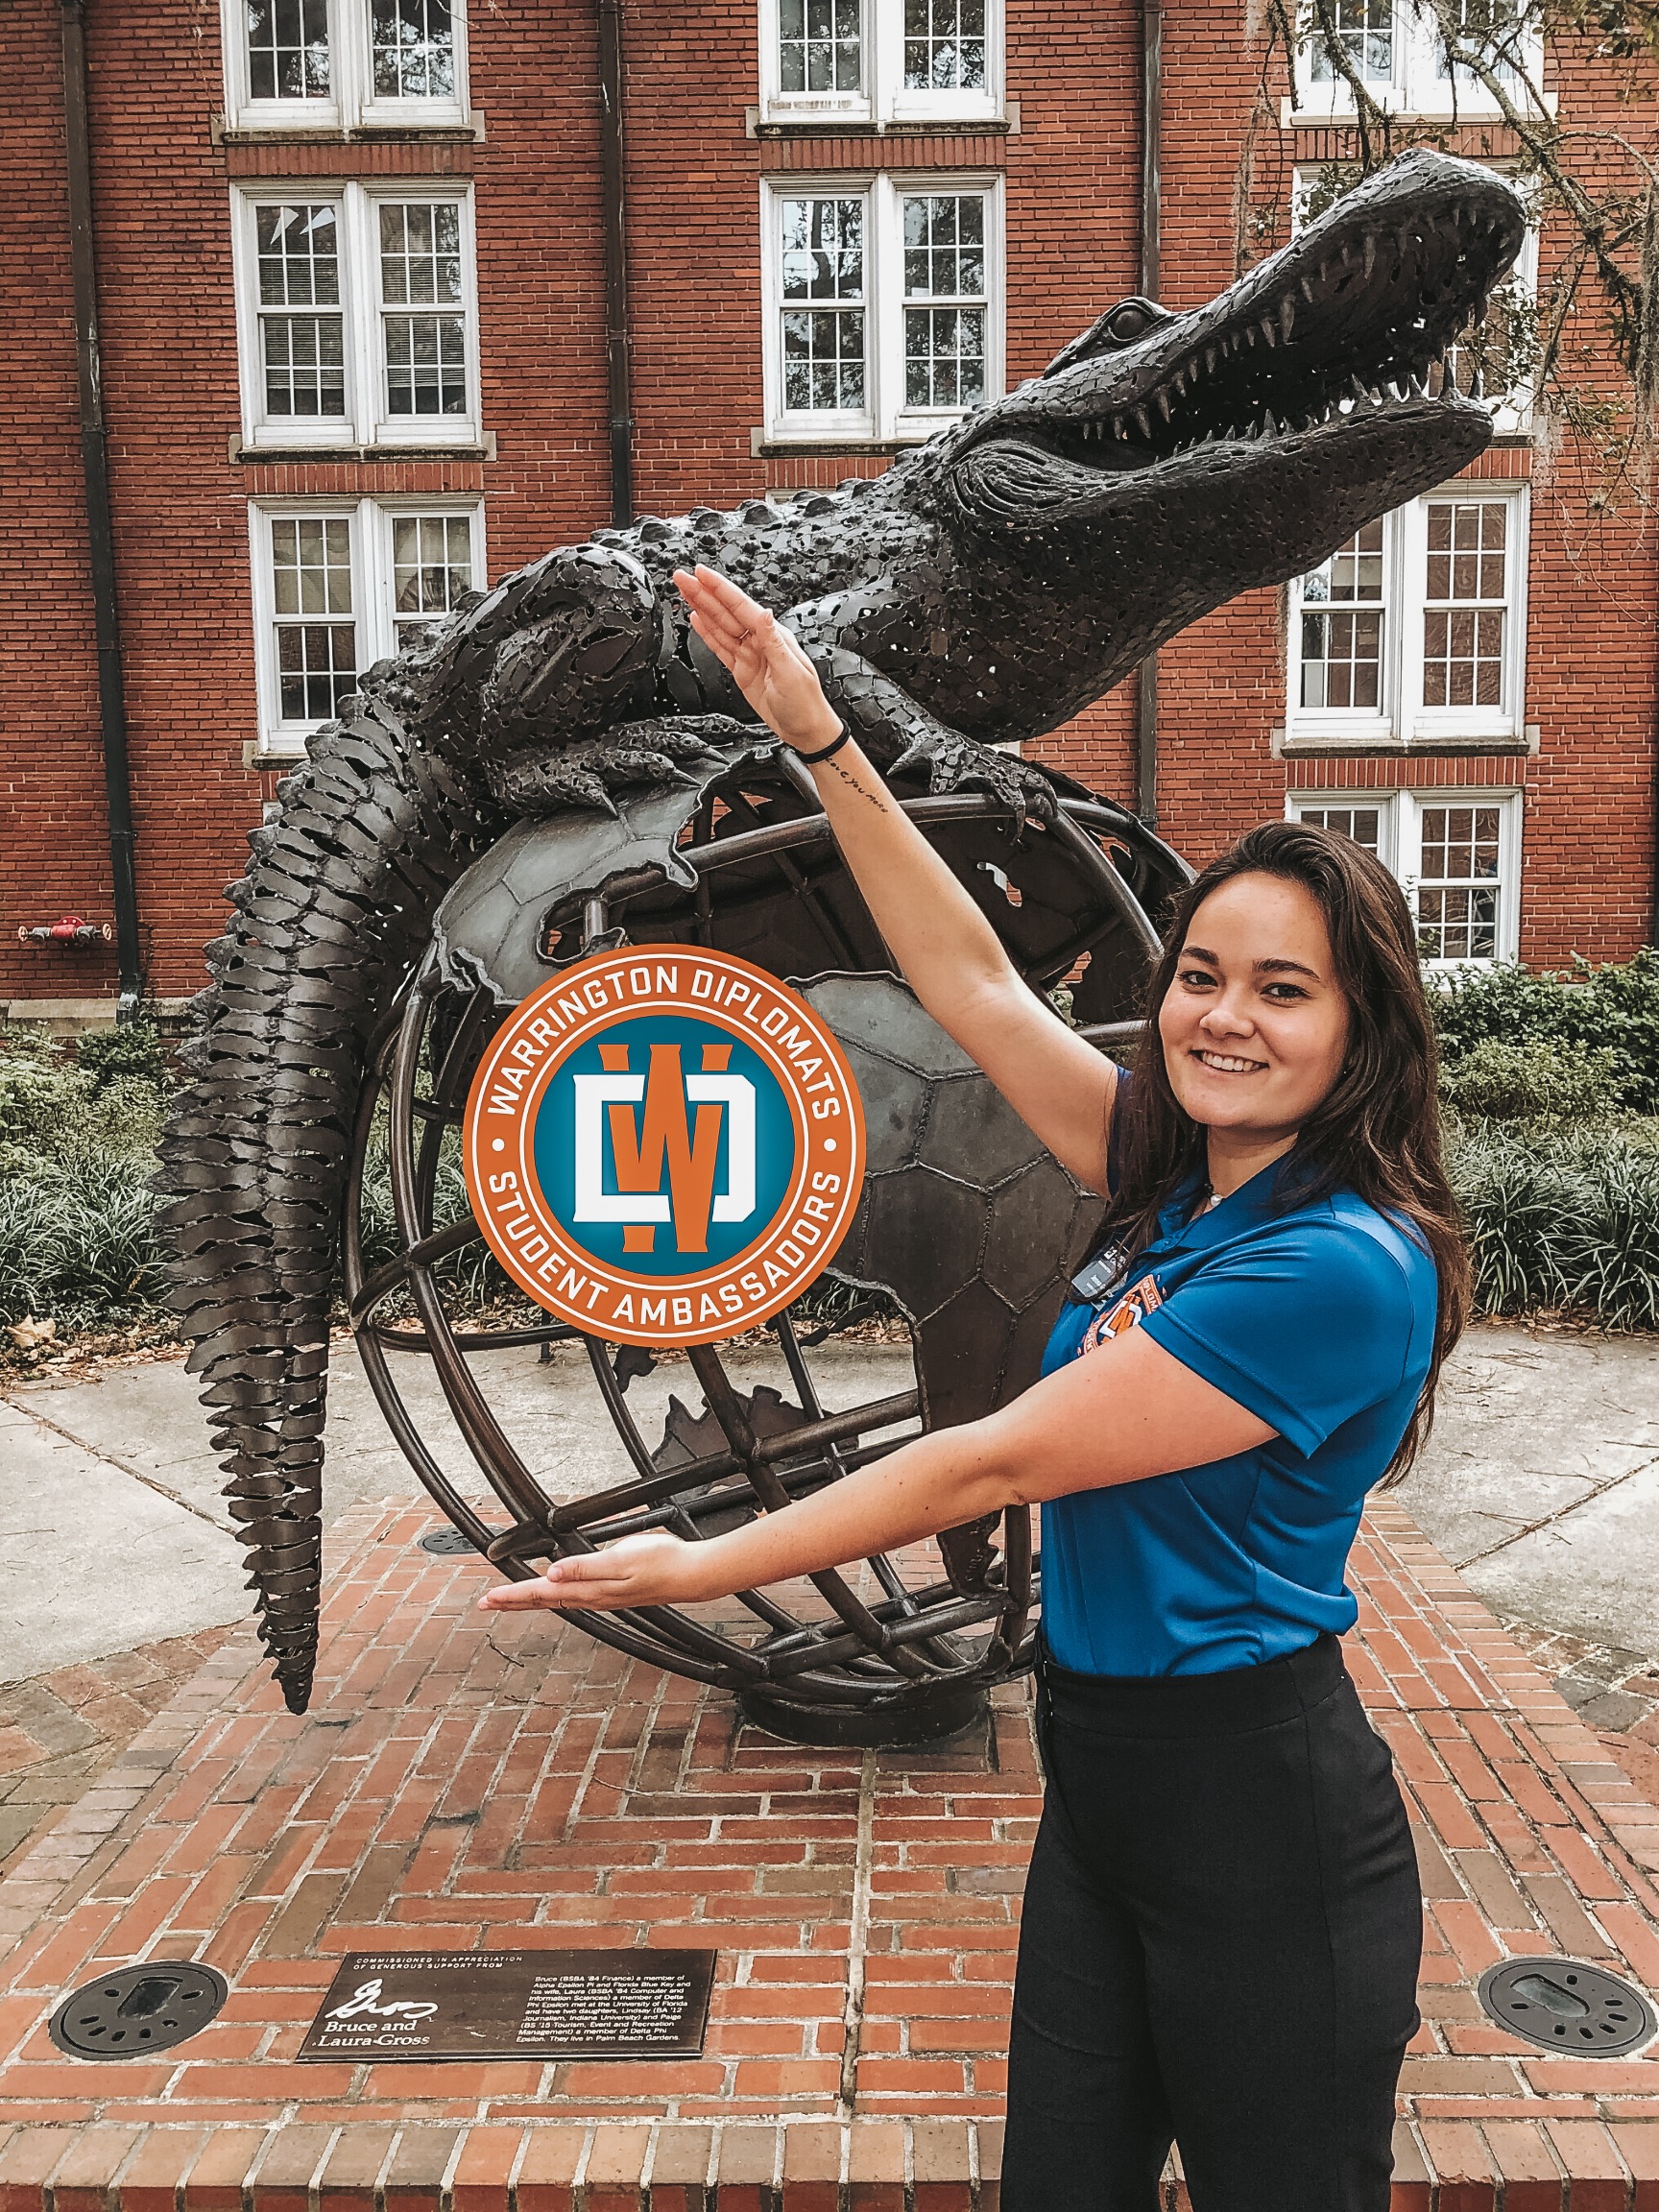 Jenna Griffiths does the Gator Chomp in front of the Gator Ubiquity Statue